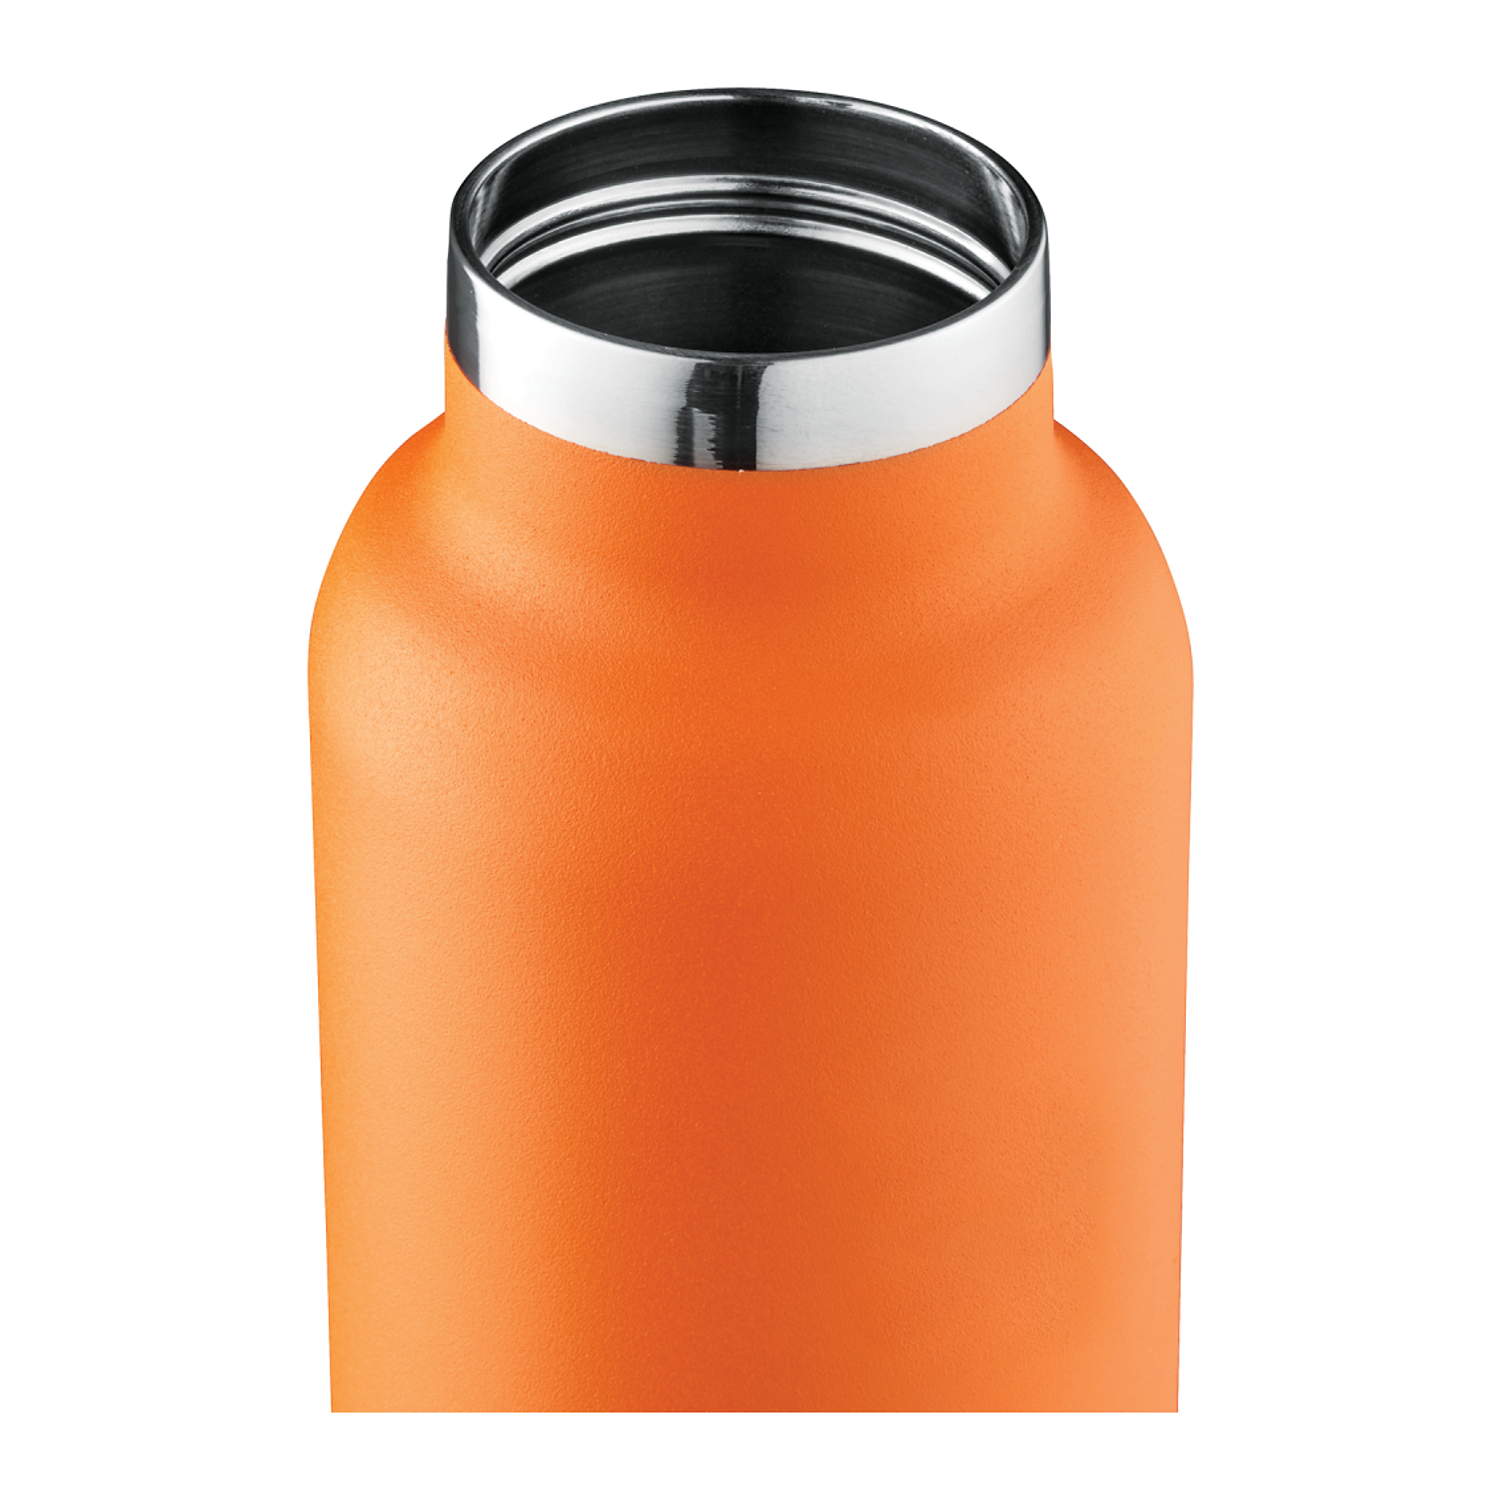 https://www.nyfifth.com/category/20220722/leeds-1625-85-thor-copper-vacuum-insulated-bottle-22oz_Orange-(OR).png